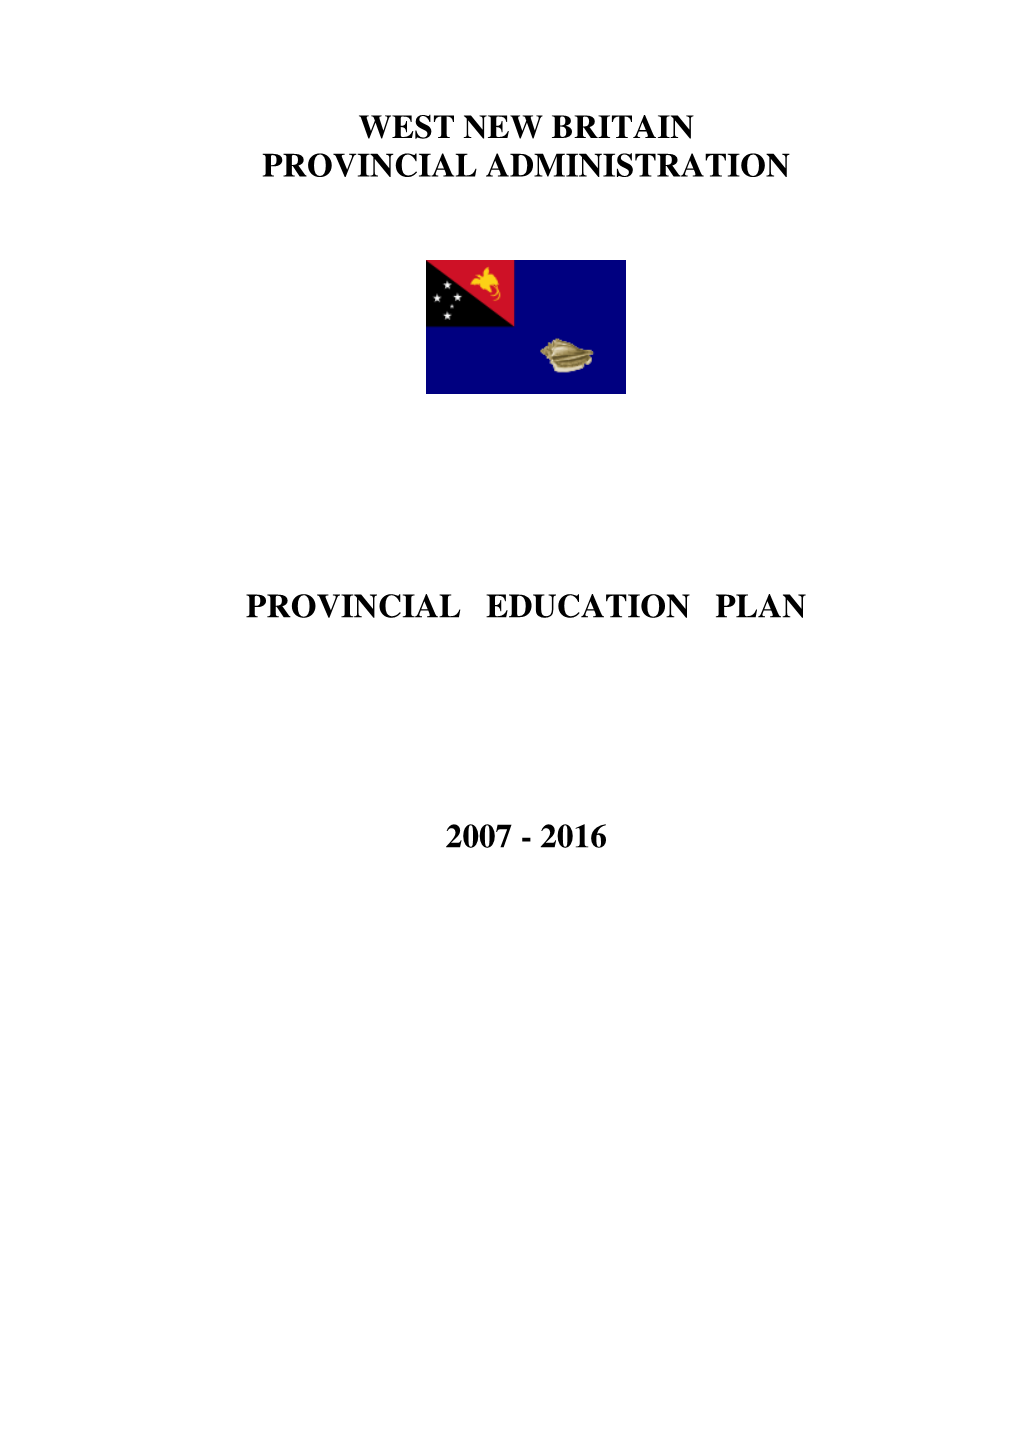 West New Britain Province and Who Have Approved the First Draft and the Final Draft of the Plan for the Provincial Executive Council Deliberations